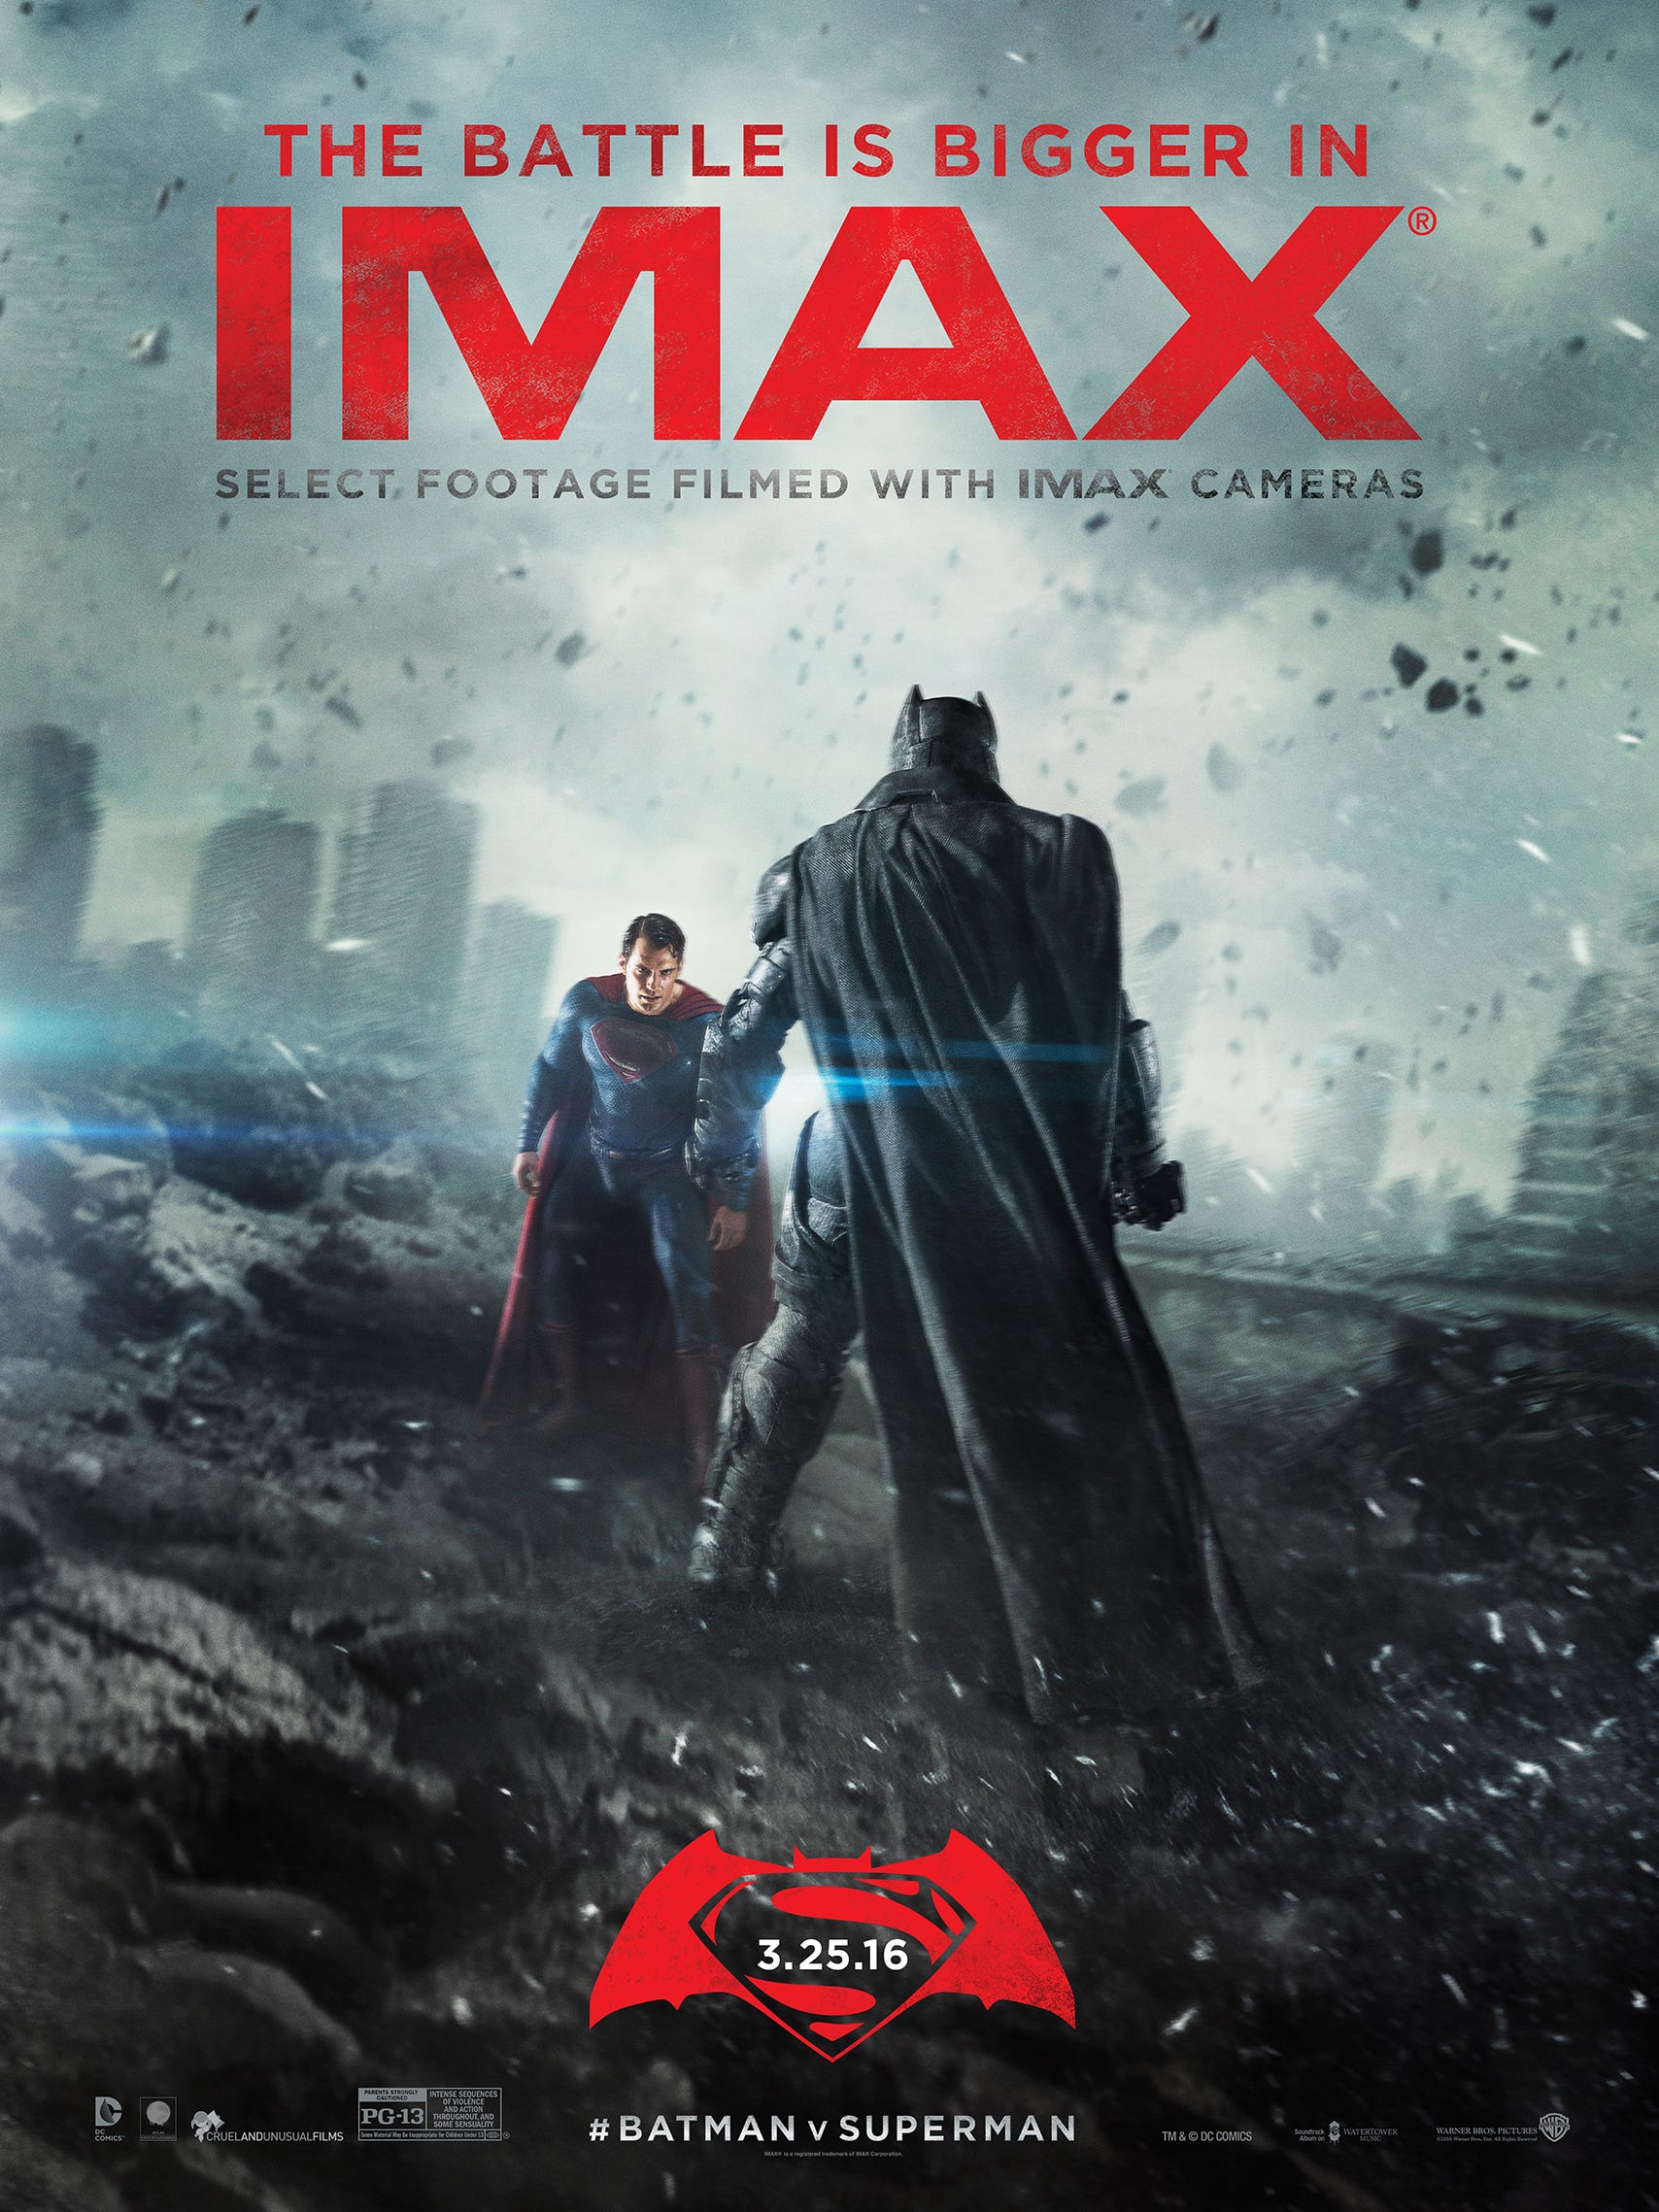 Super frenemies face off in exclusive 'Batman v Superman' IMAX poster